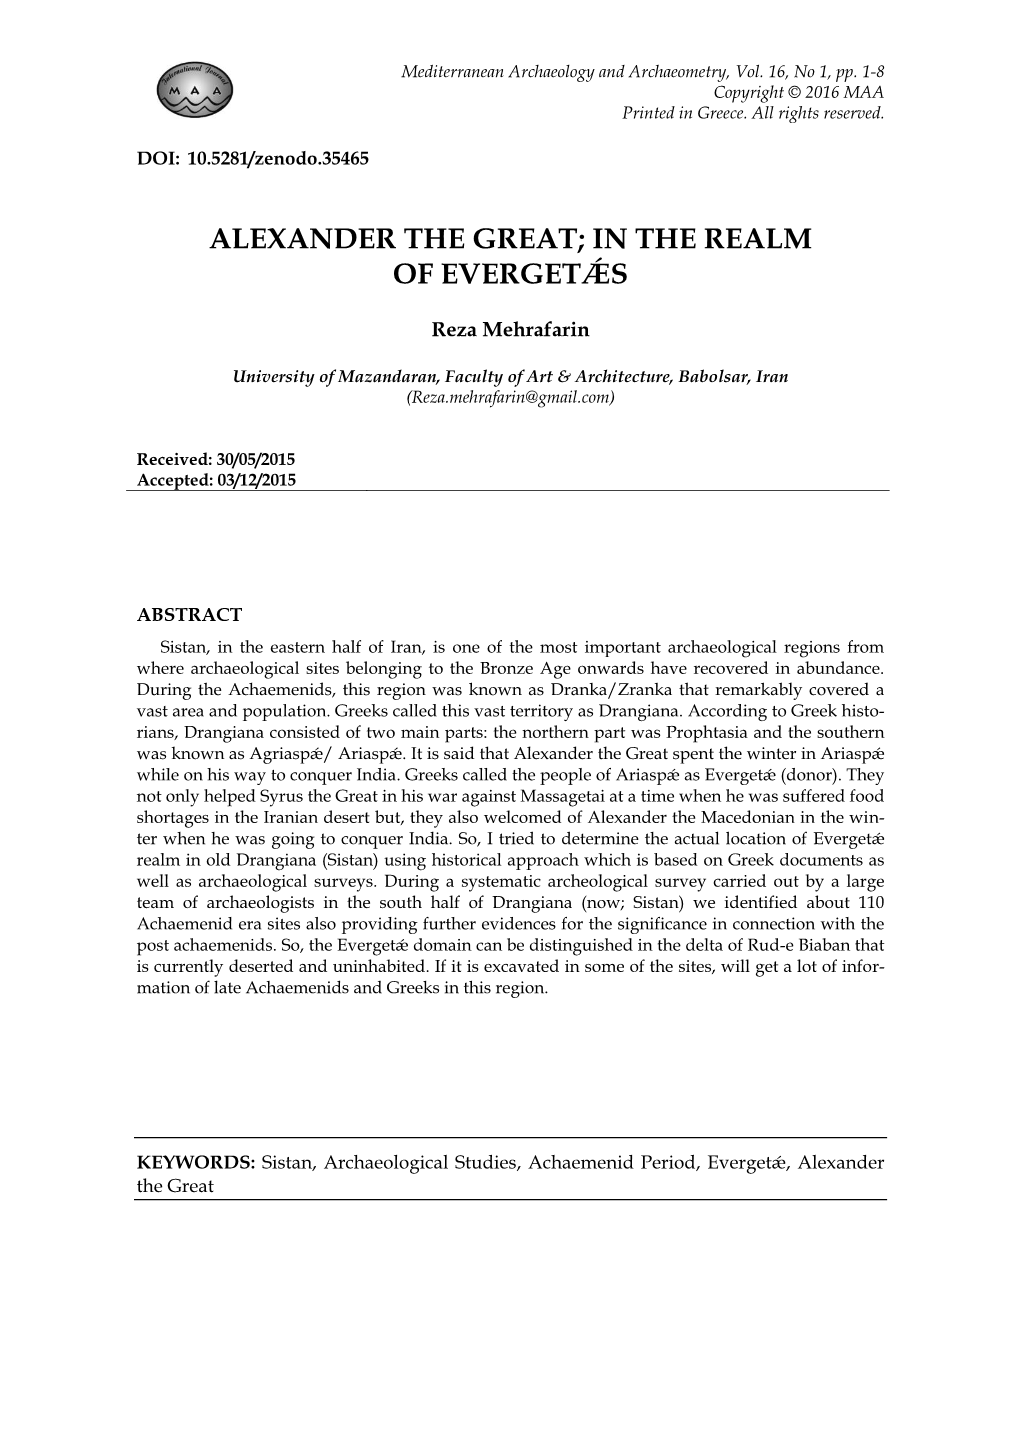 Alexander the Great; in the Realm of Evergetǽs